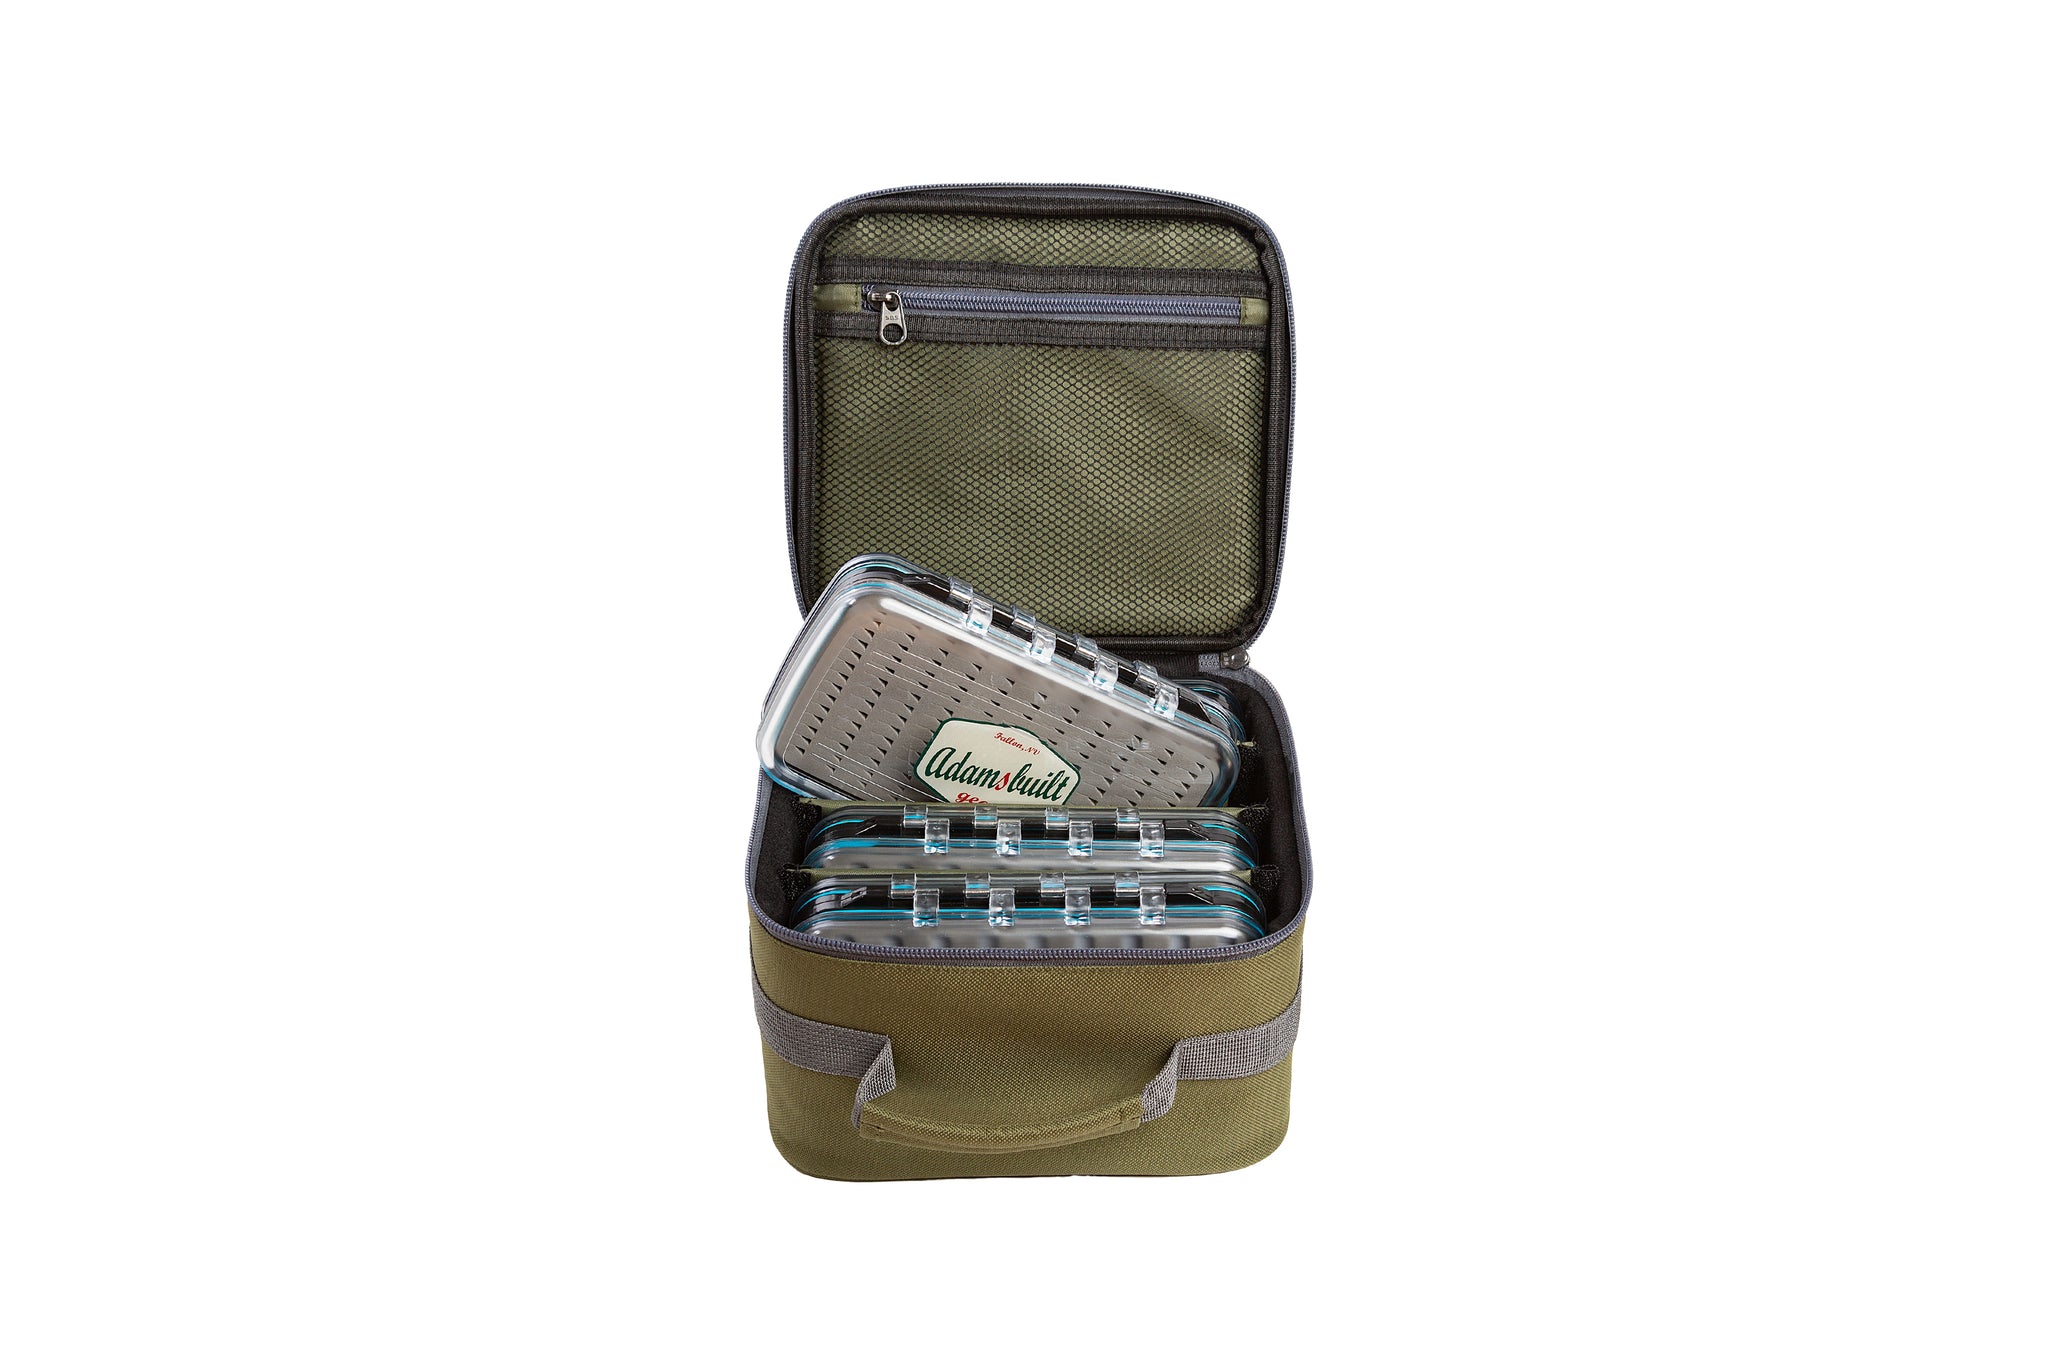 Fly Box Carry Case - Large